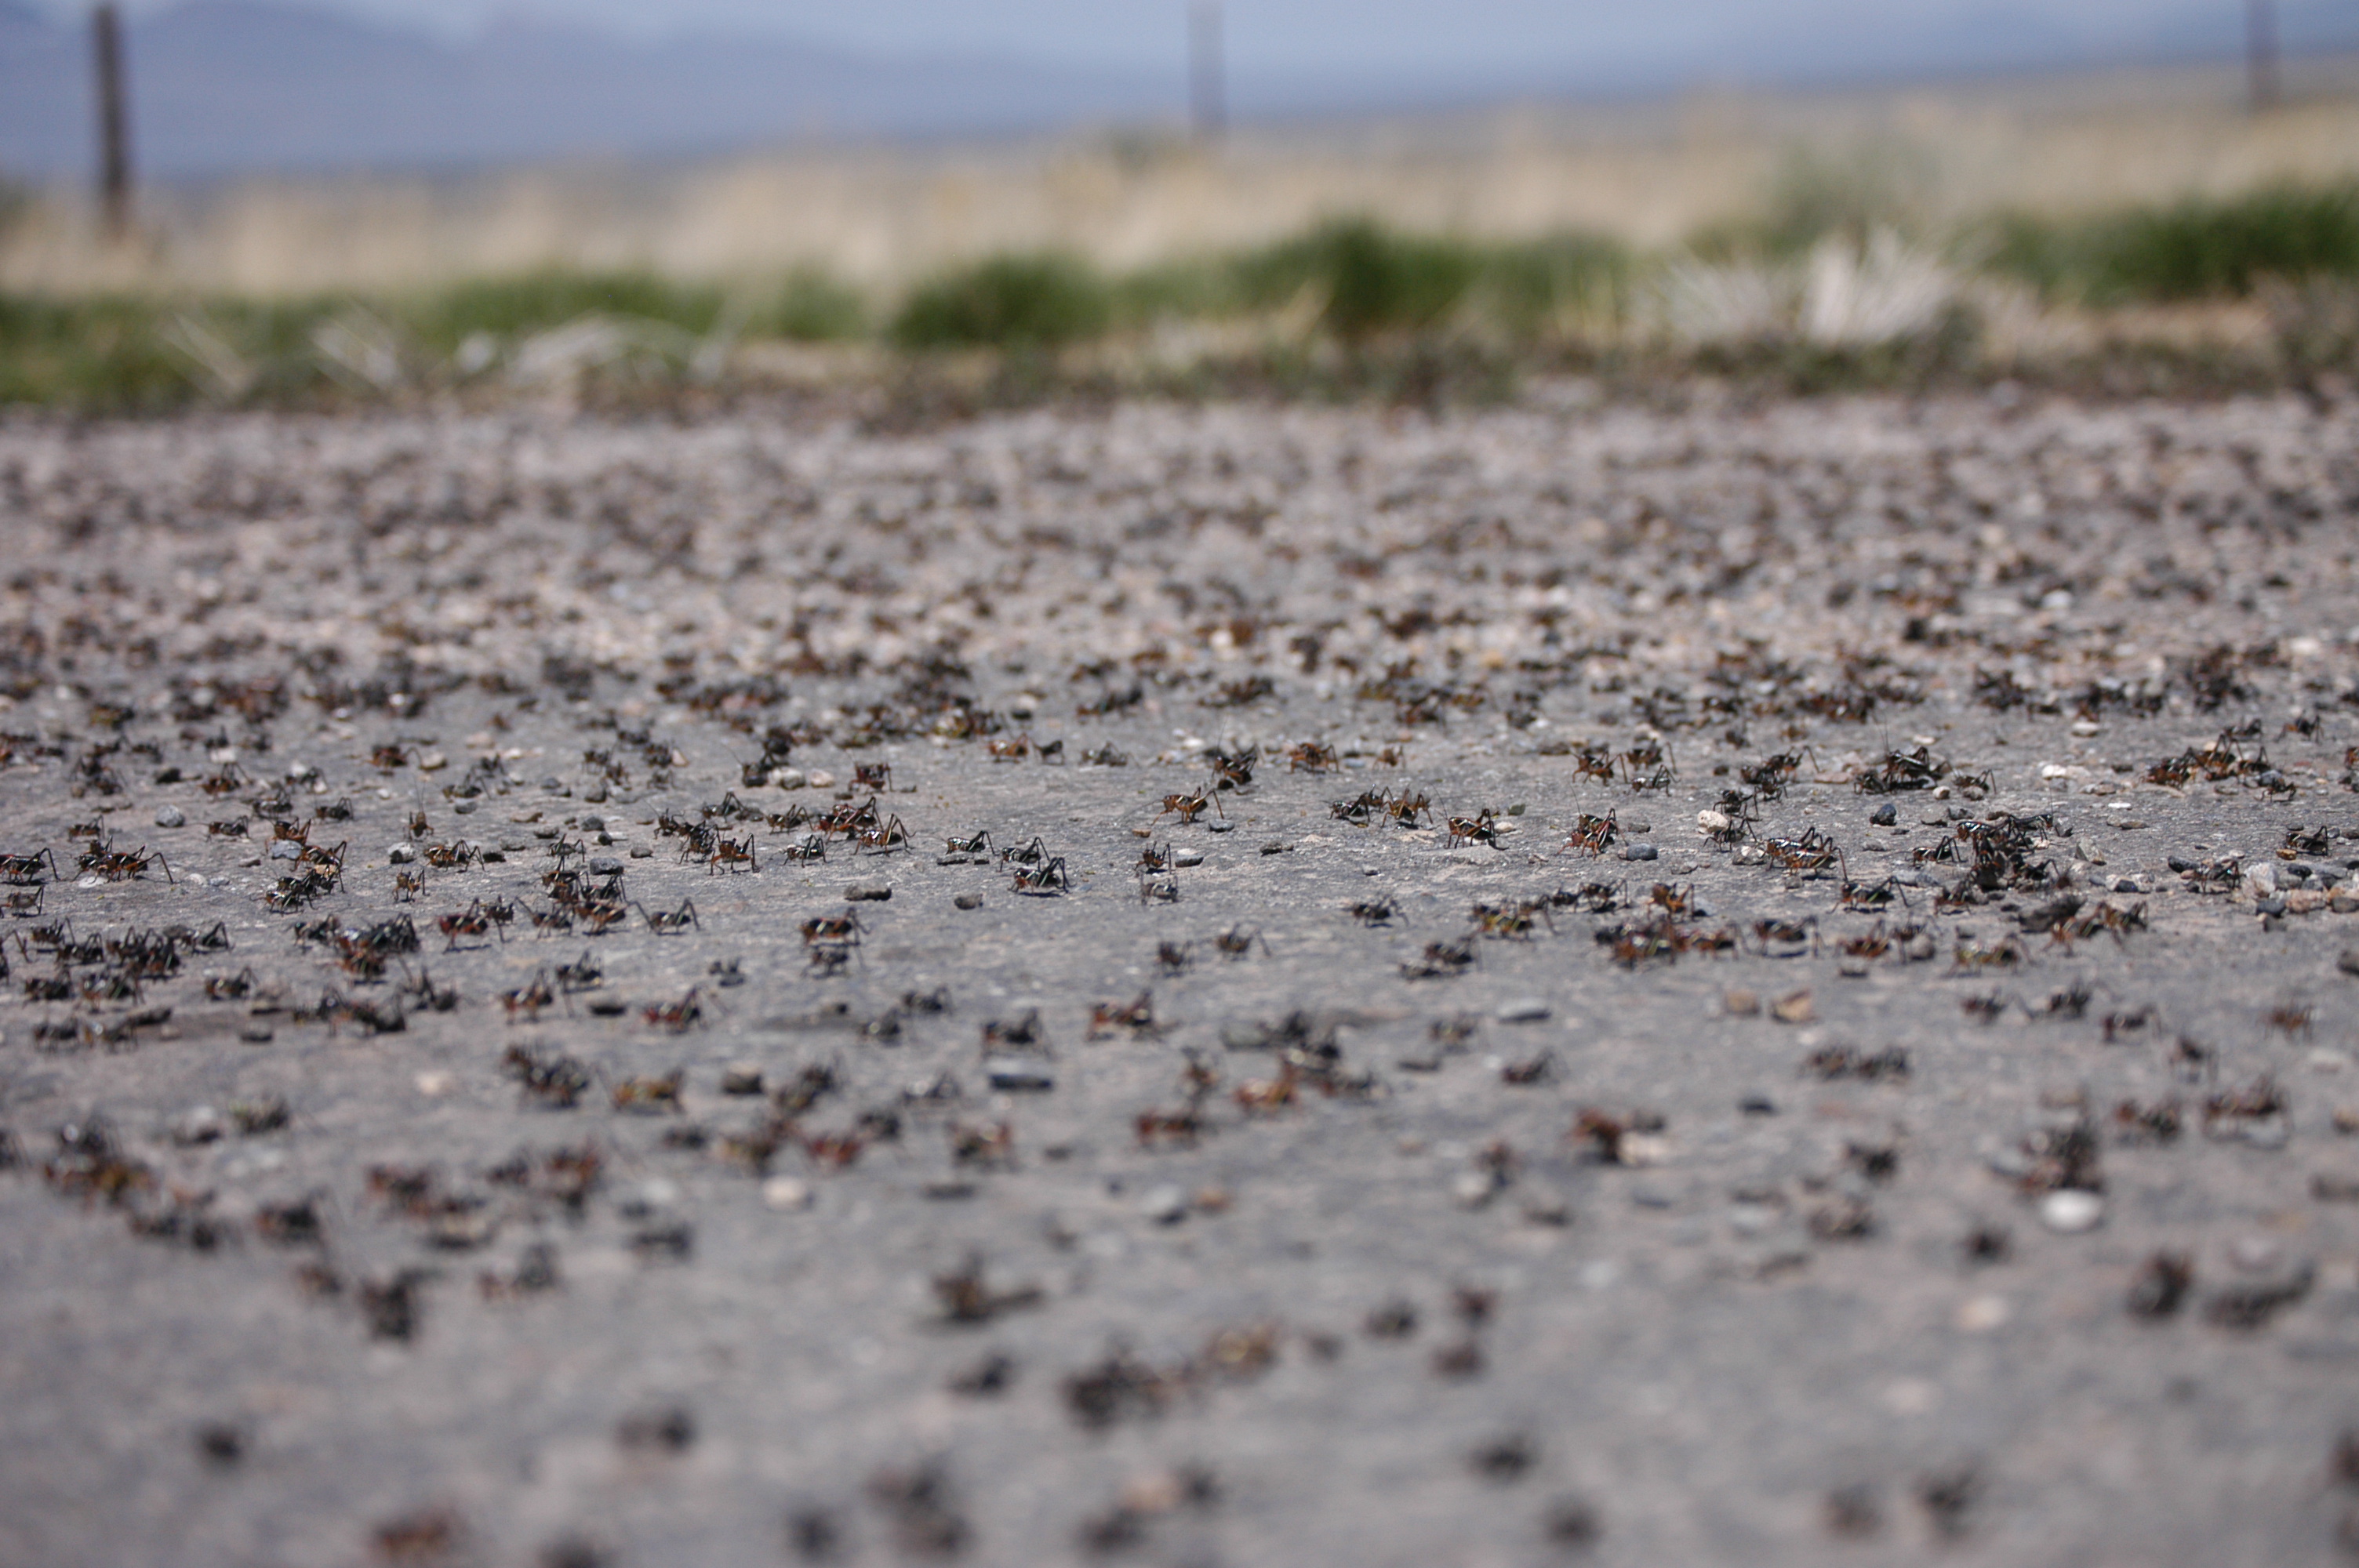 A swarm of Mormon crickets cover the road.